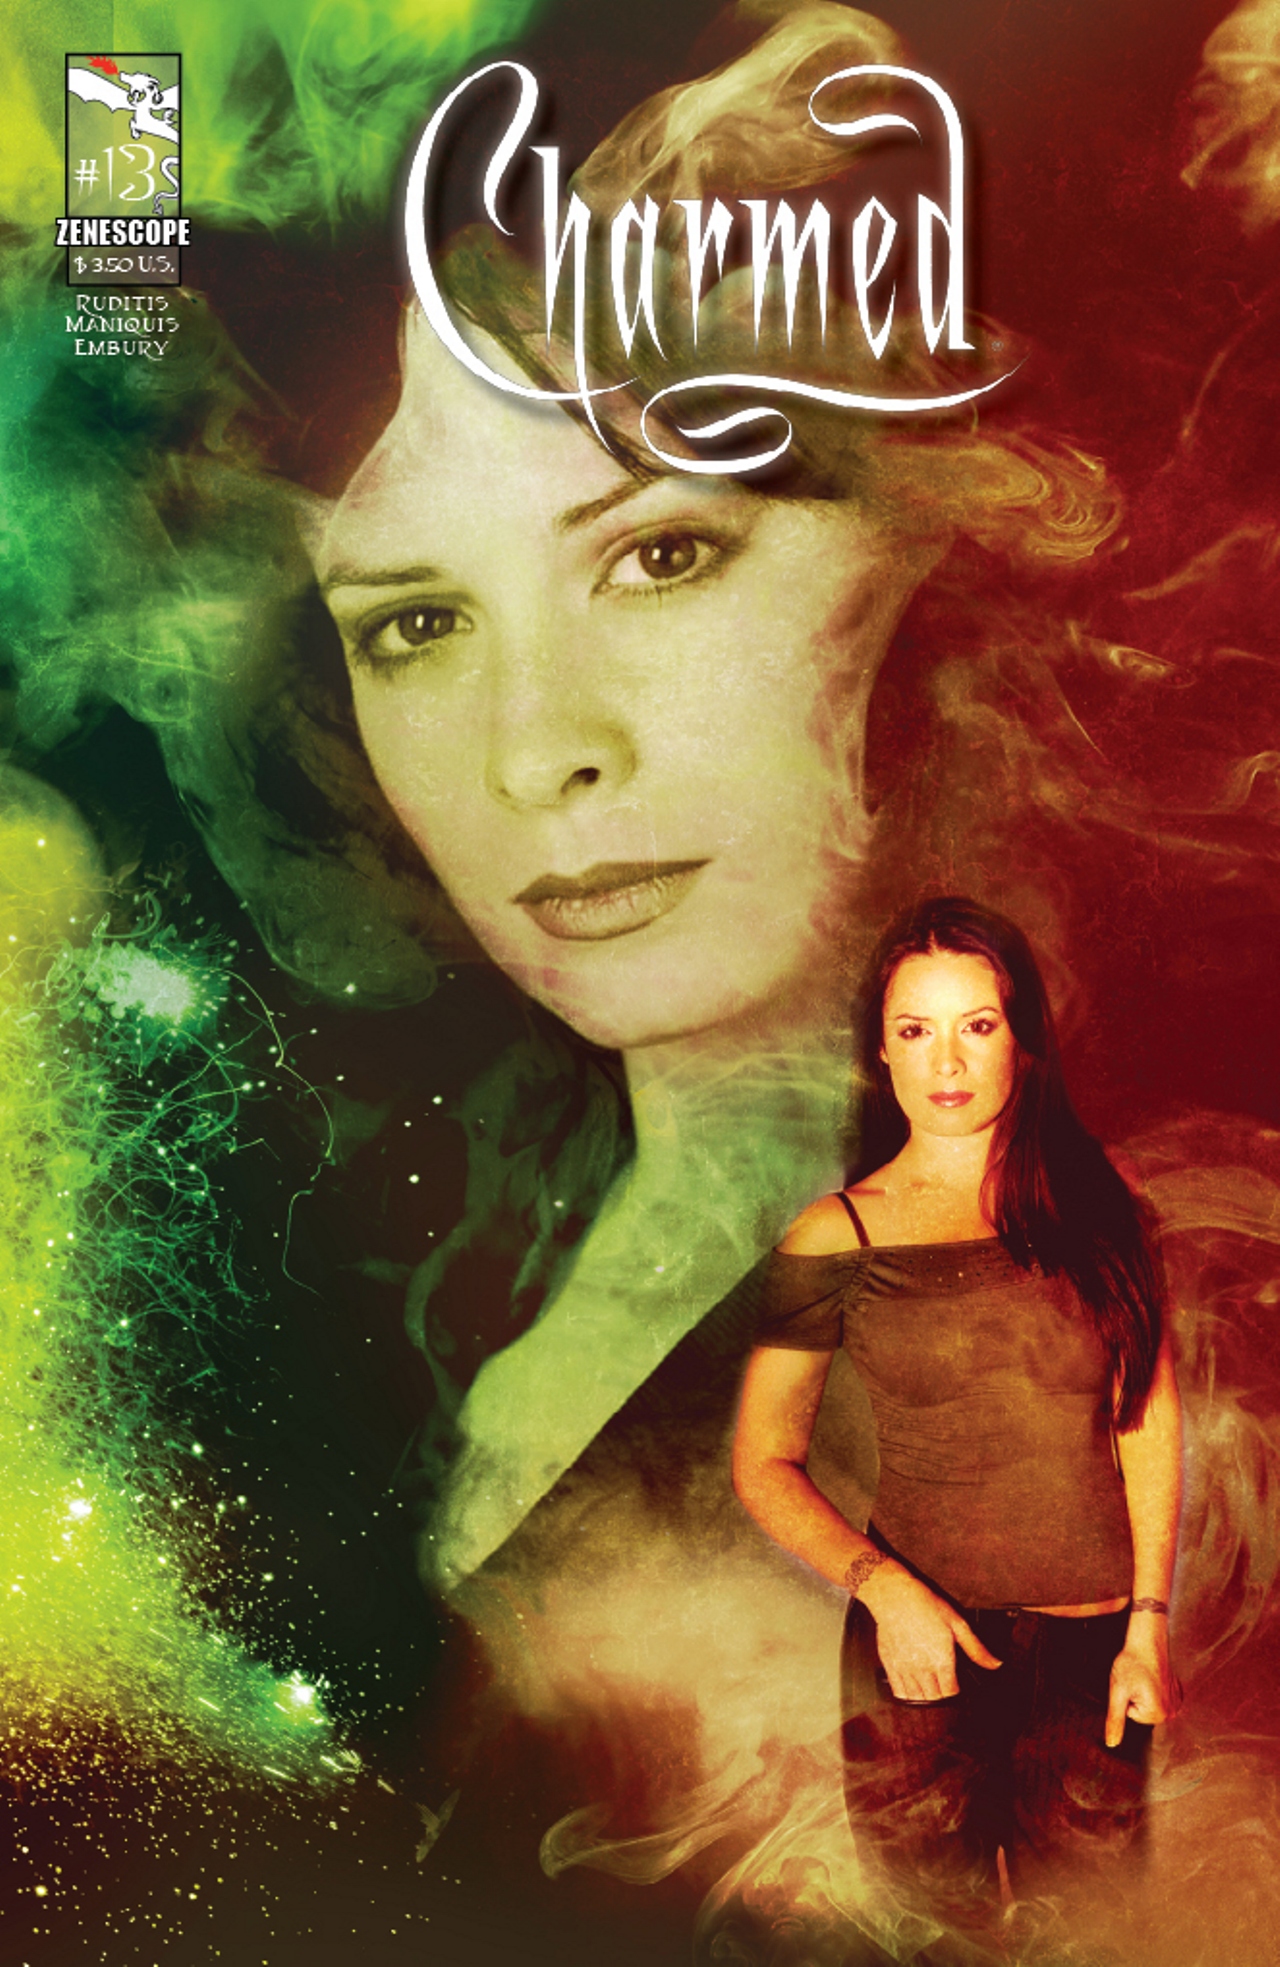 Read online Charmed comic -  Issue #13 - 2